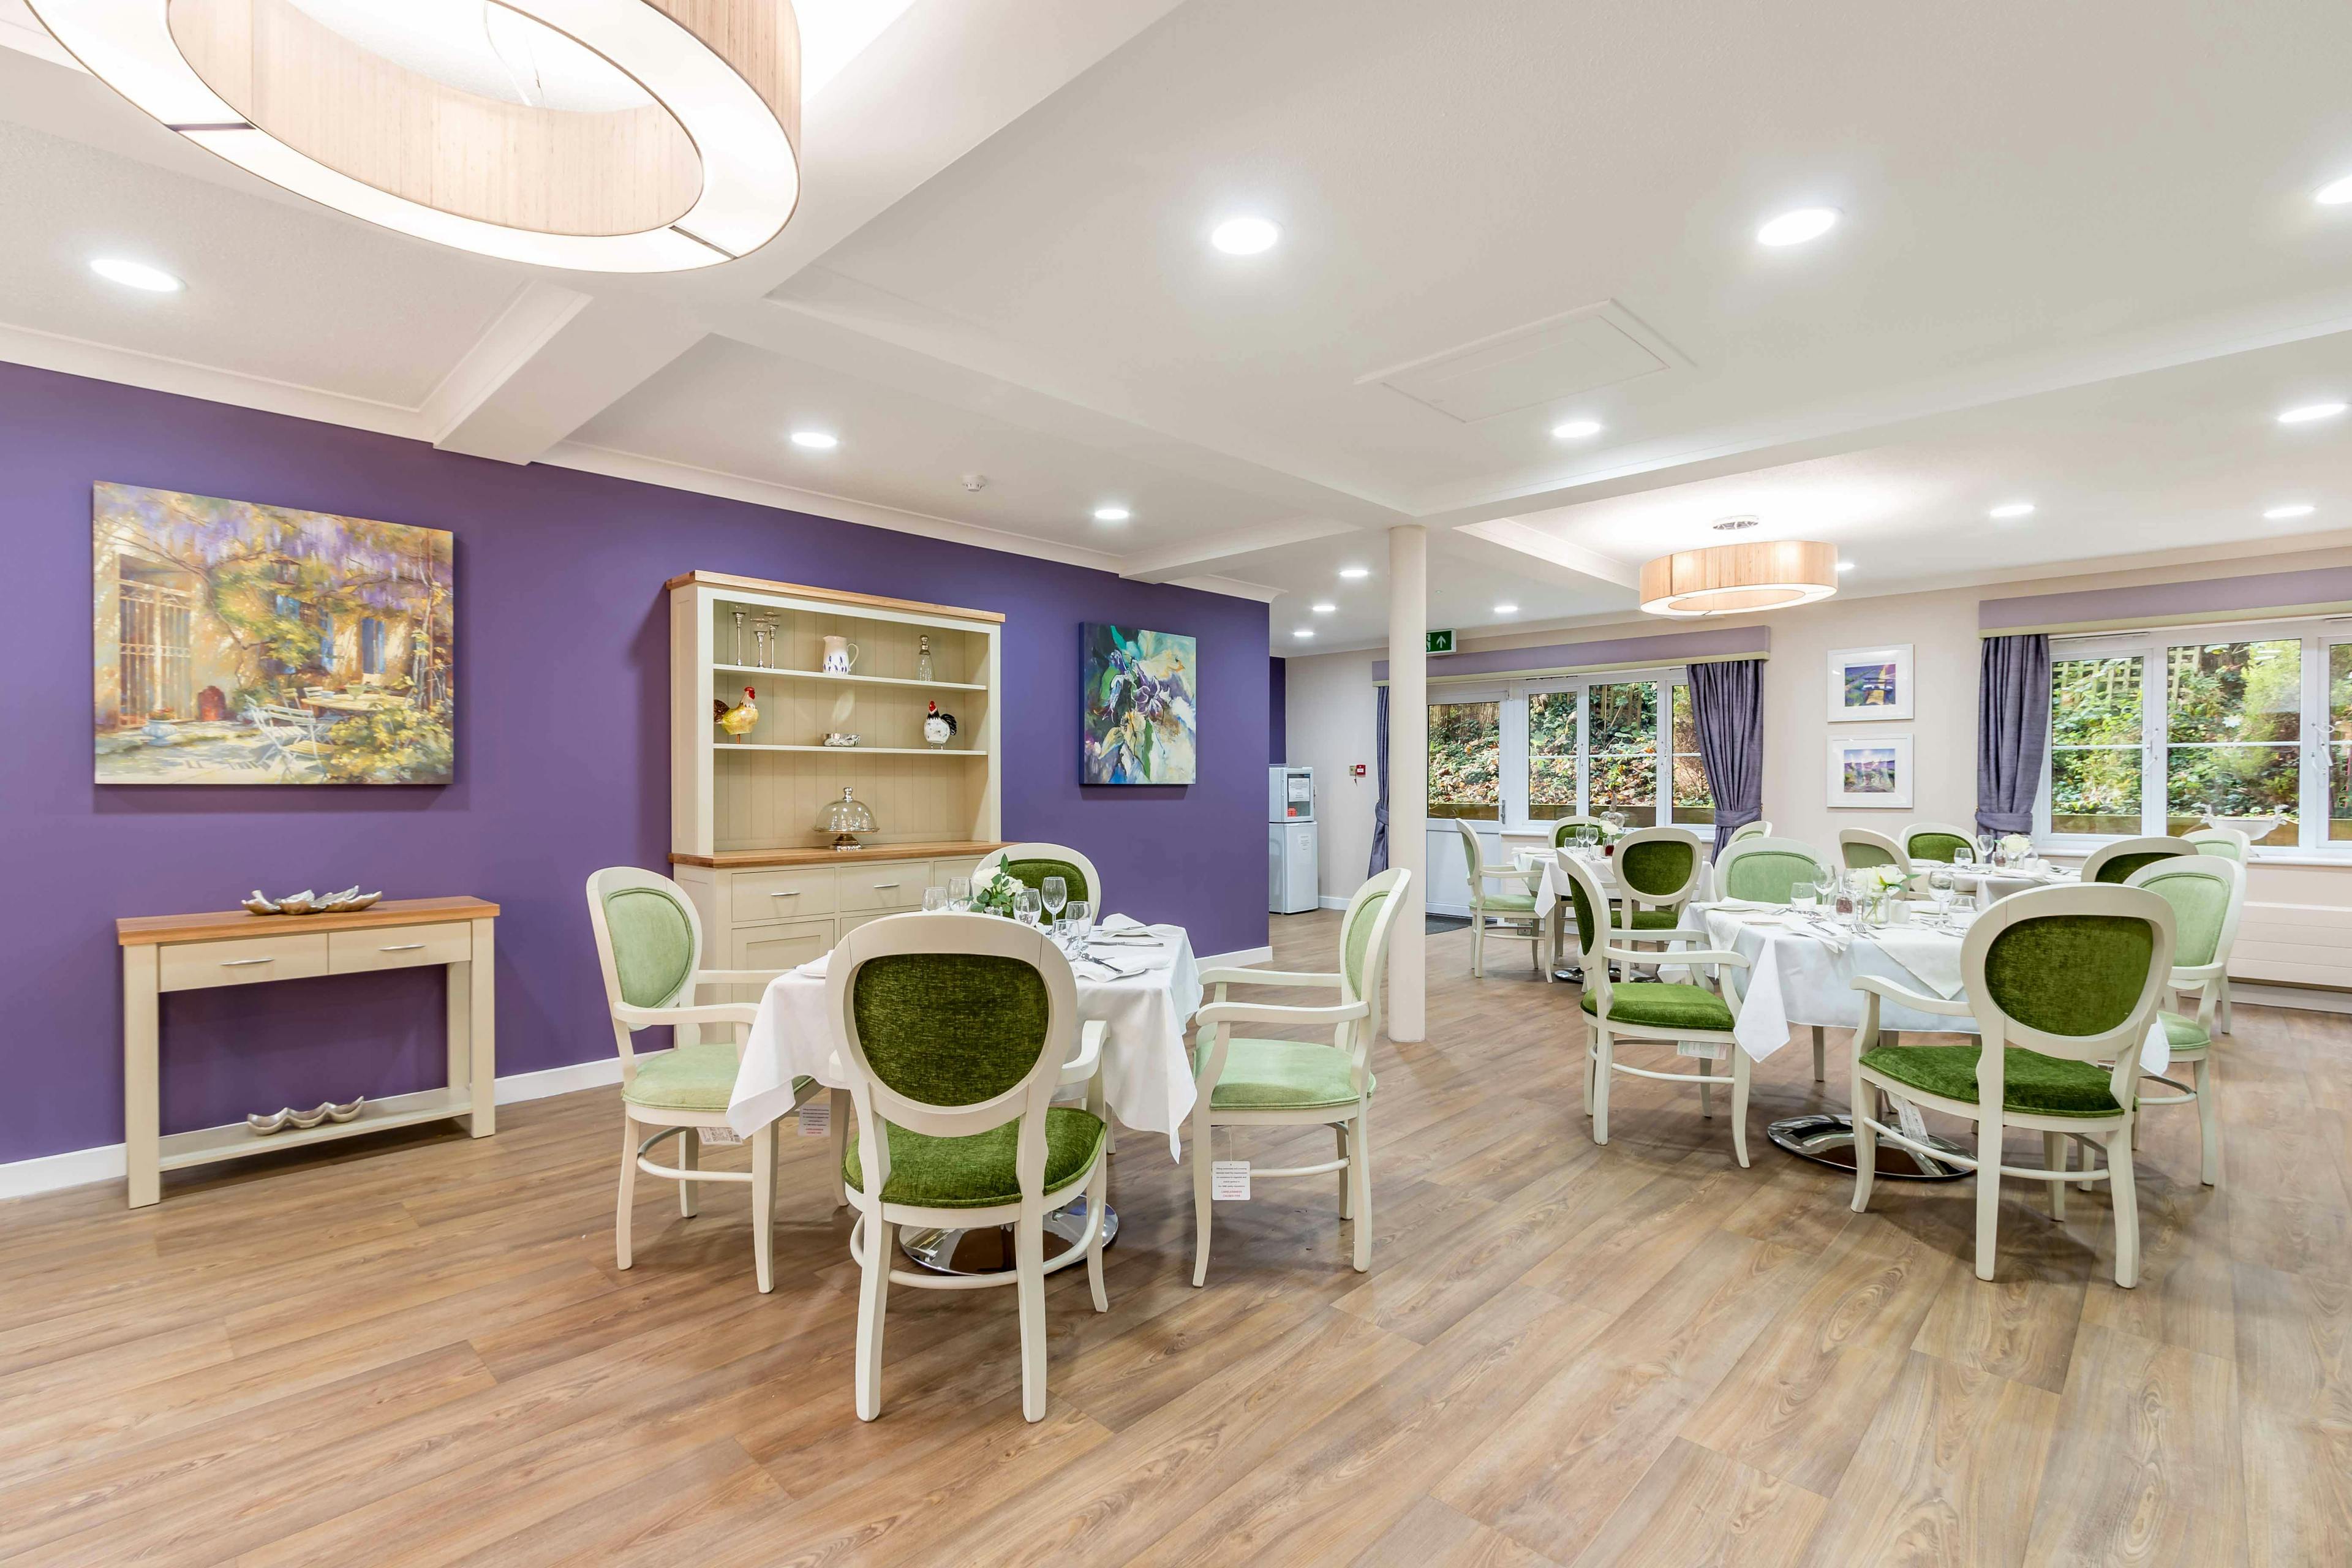 Dining Room at Shelburne Lodge Care Home in High Wycombe, Buckinghamshire